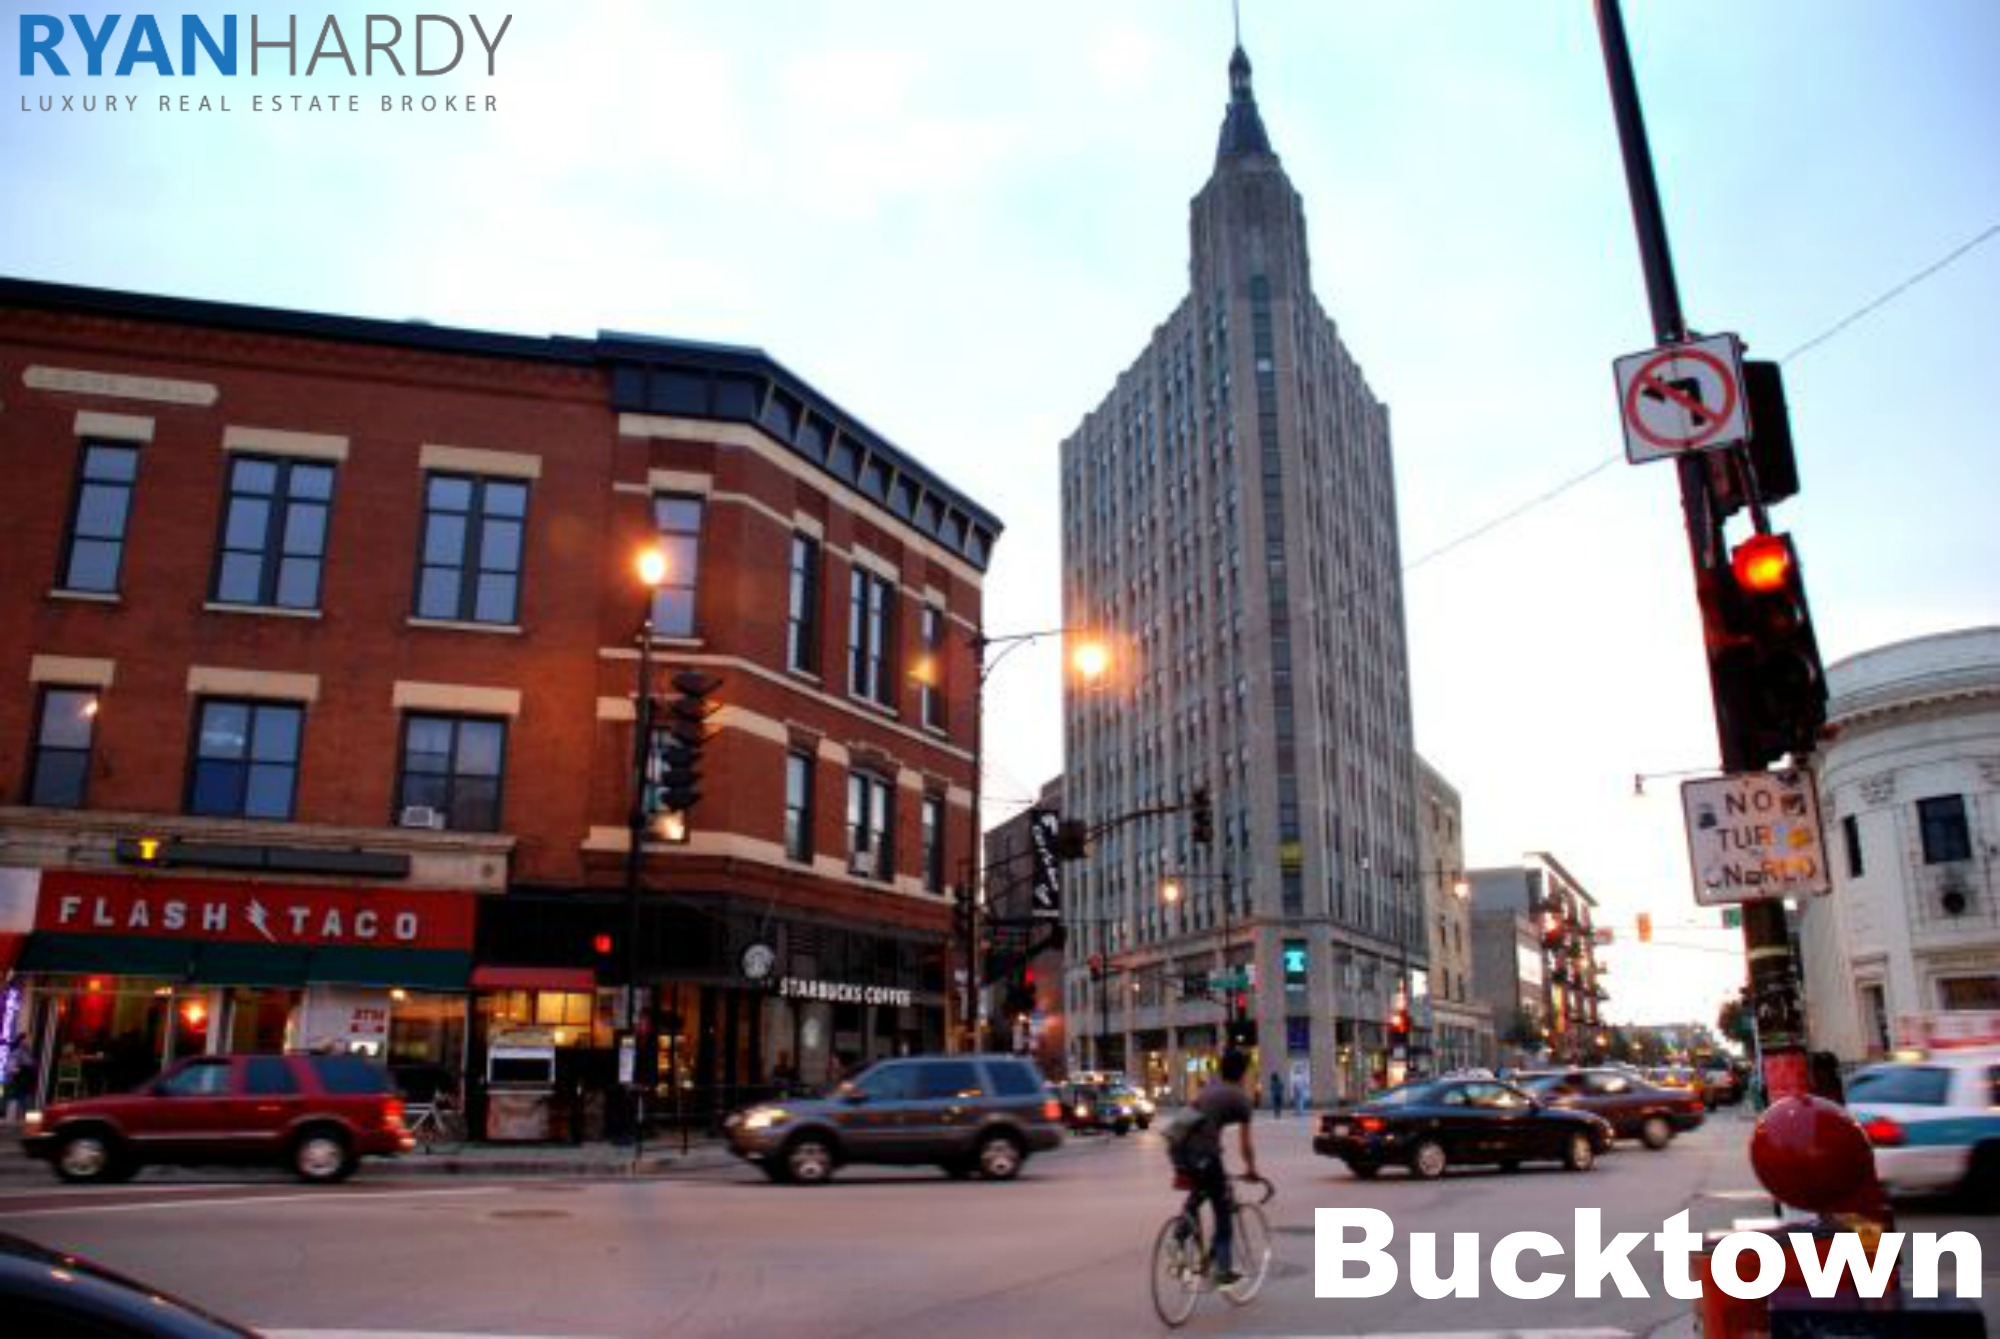 Homes for sale Bucktown Chicago